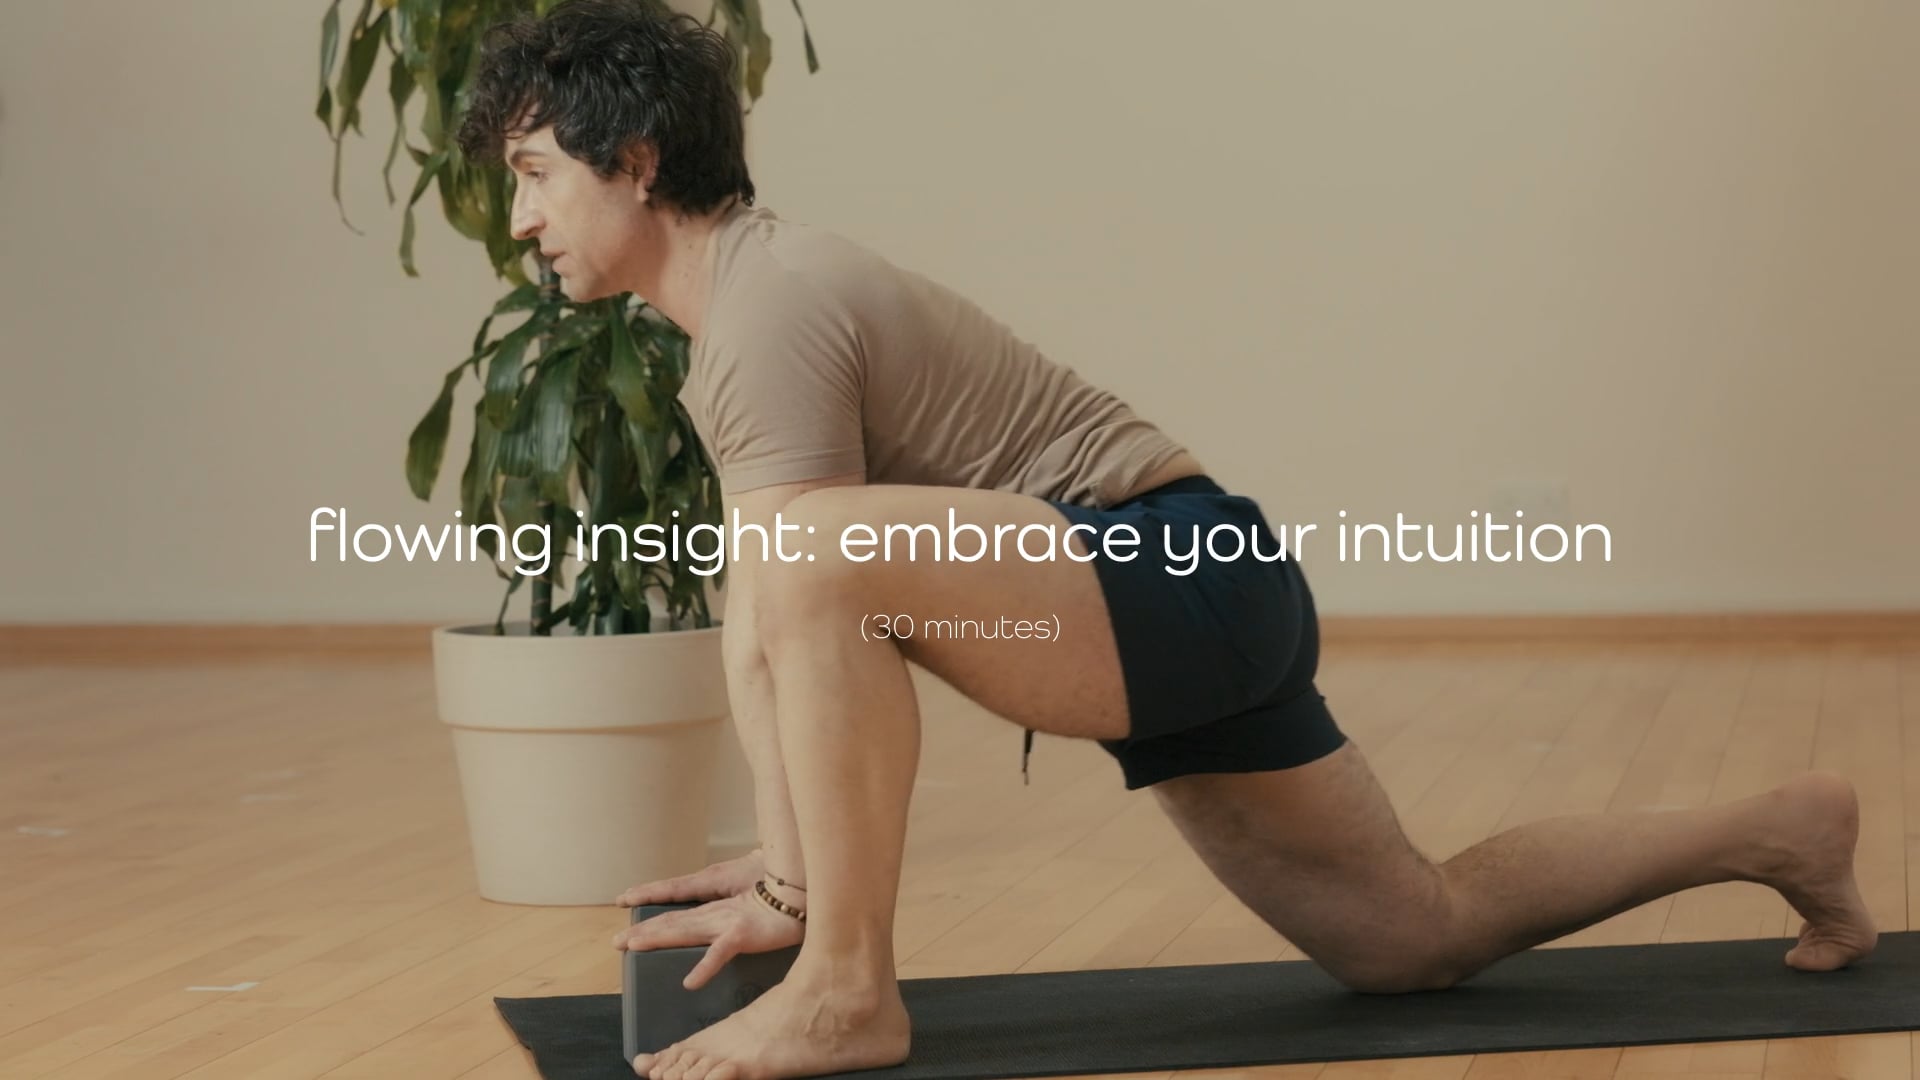 Flowing Insight: Embrace Your Intuition | Yoga Flow – 30 mins